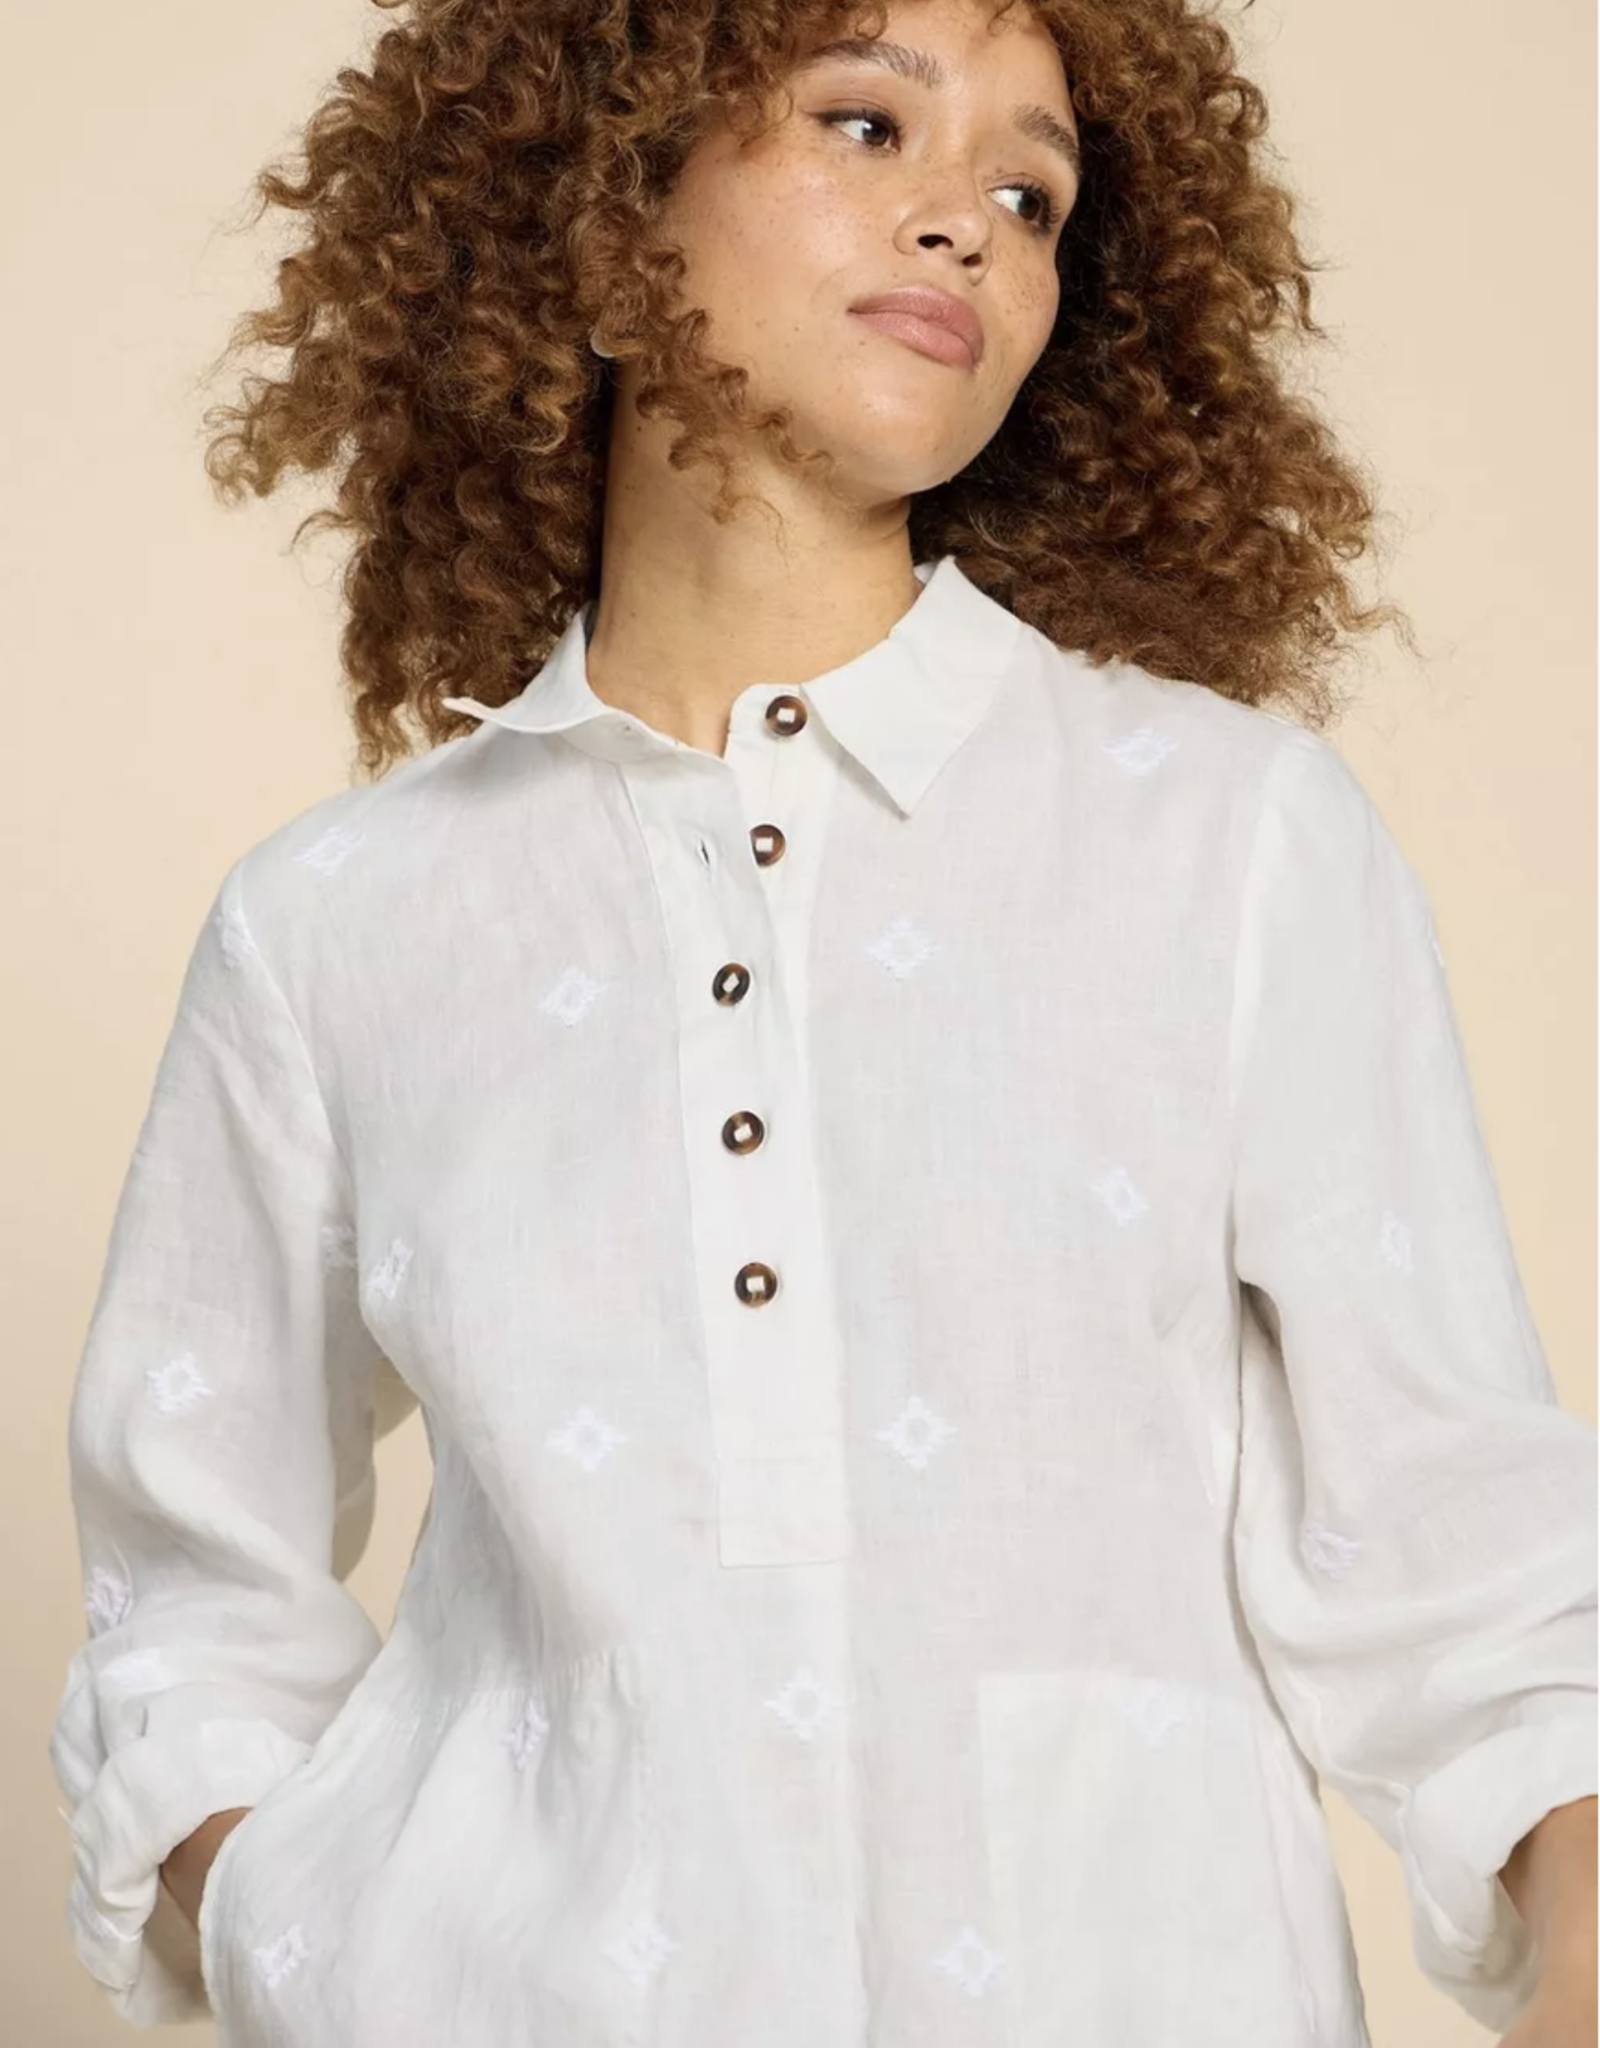 White Stuff White Stuff - SS24 Evelyn Embroidered Linen Tunic